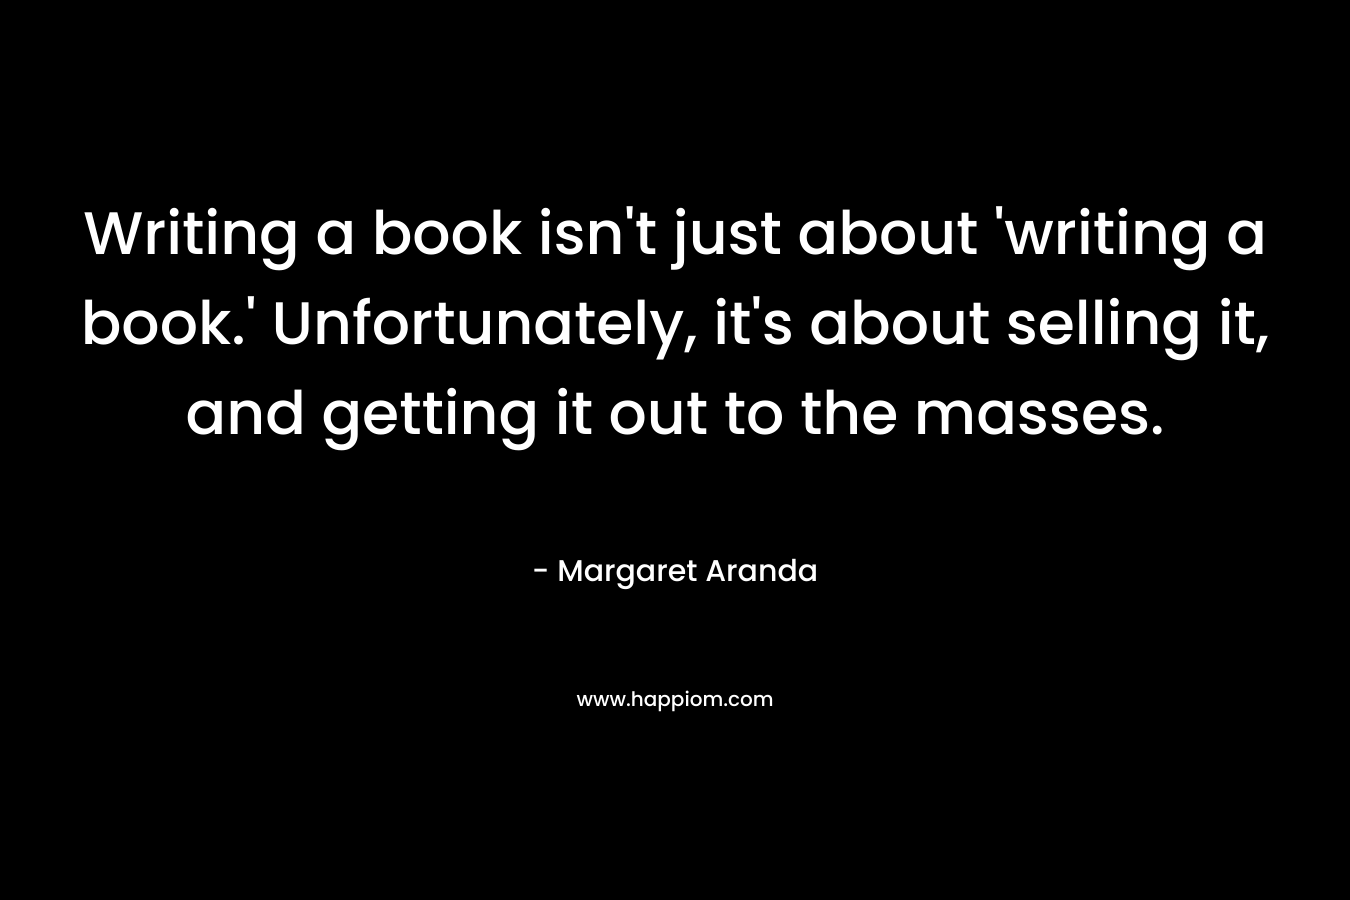 Writing a book isn't just about 'writing a book.' Unfortunately, it's about selling it, and getting it out to the masses.